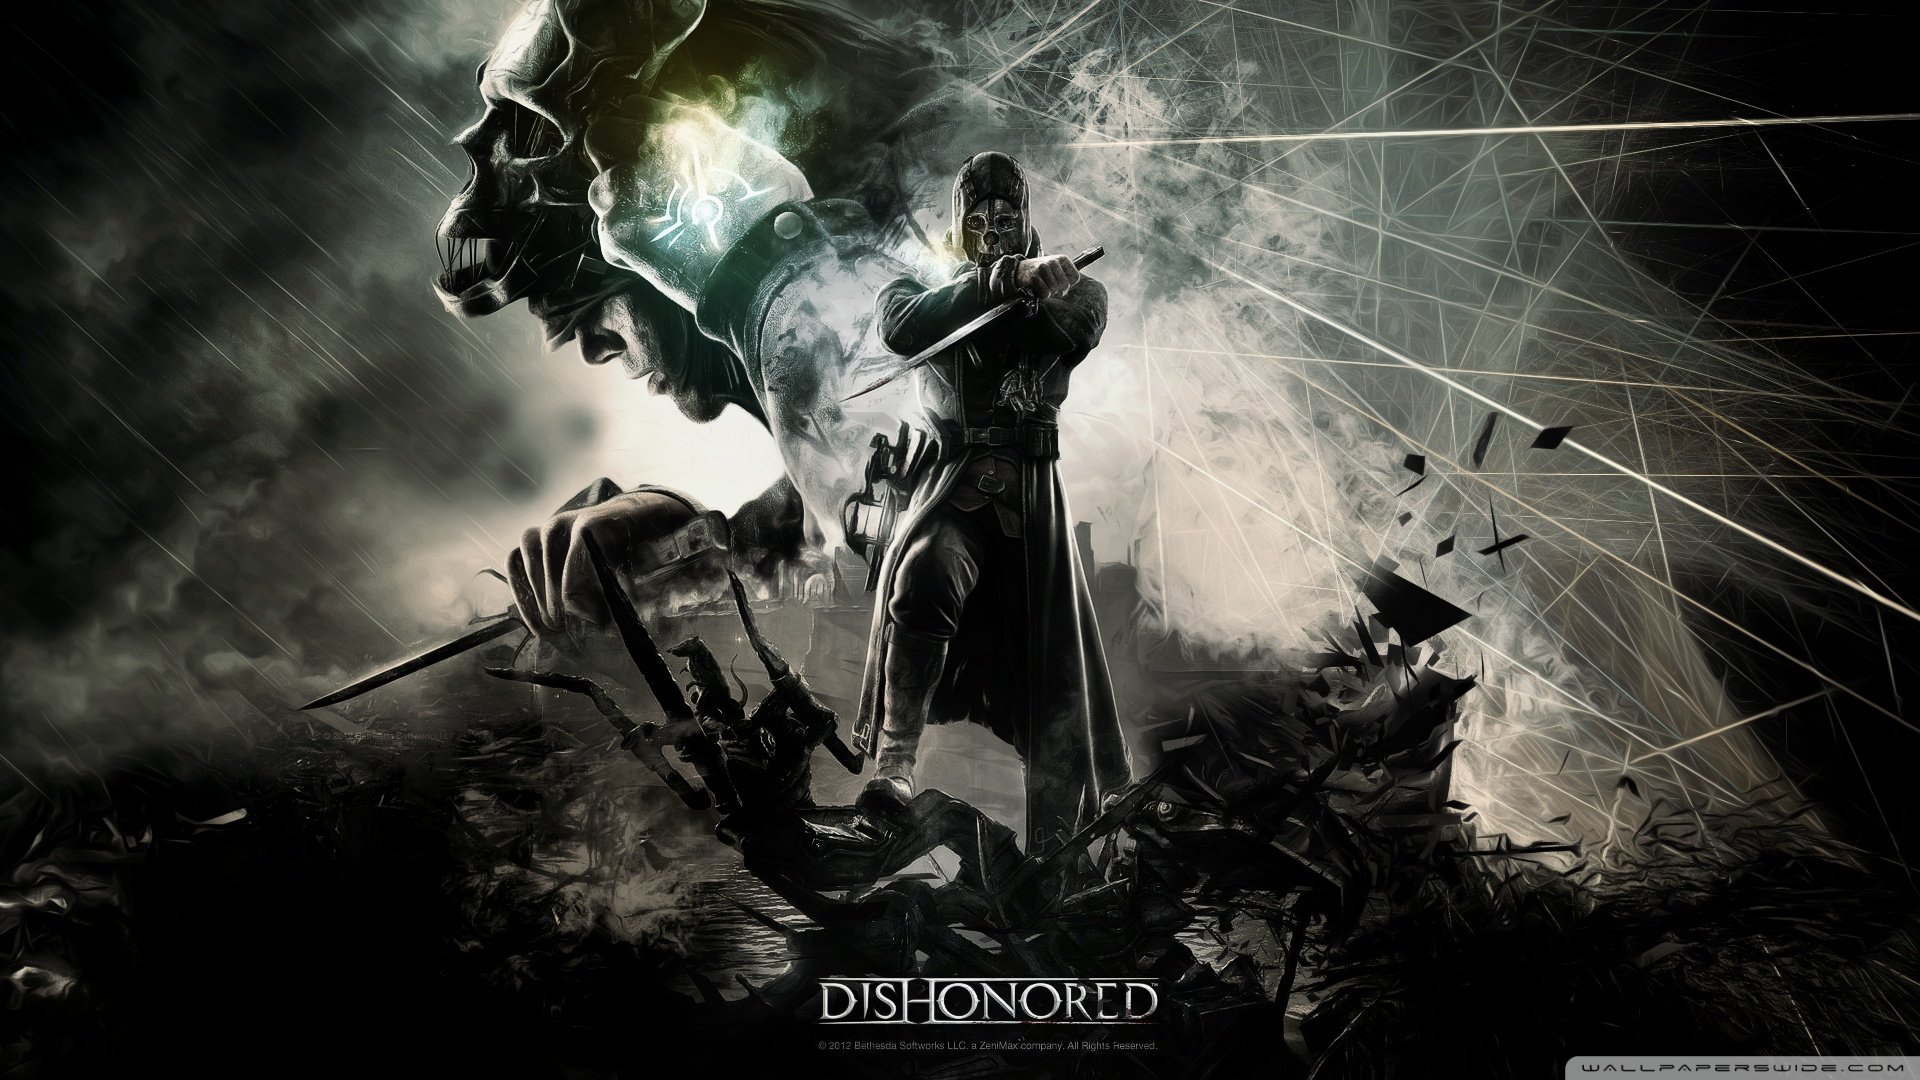 Dishonored Video Game Wallpaper 1920x1080 Dishonored Video Game 1920x1080